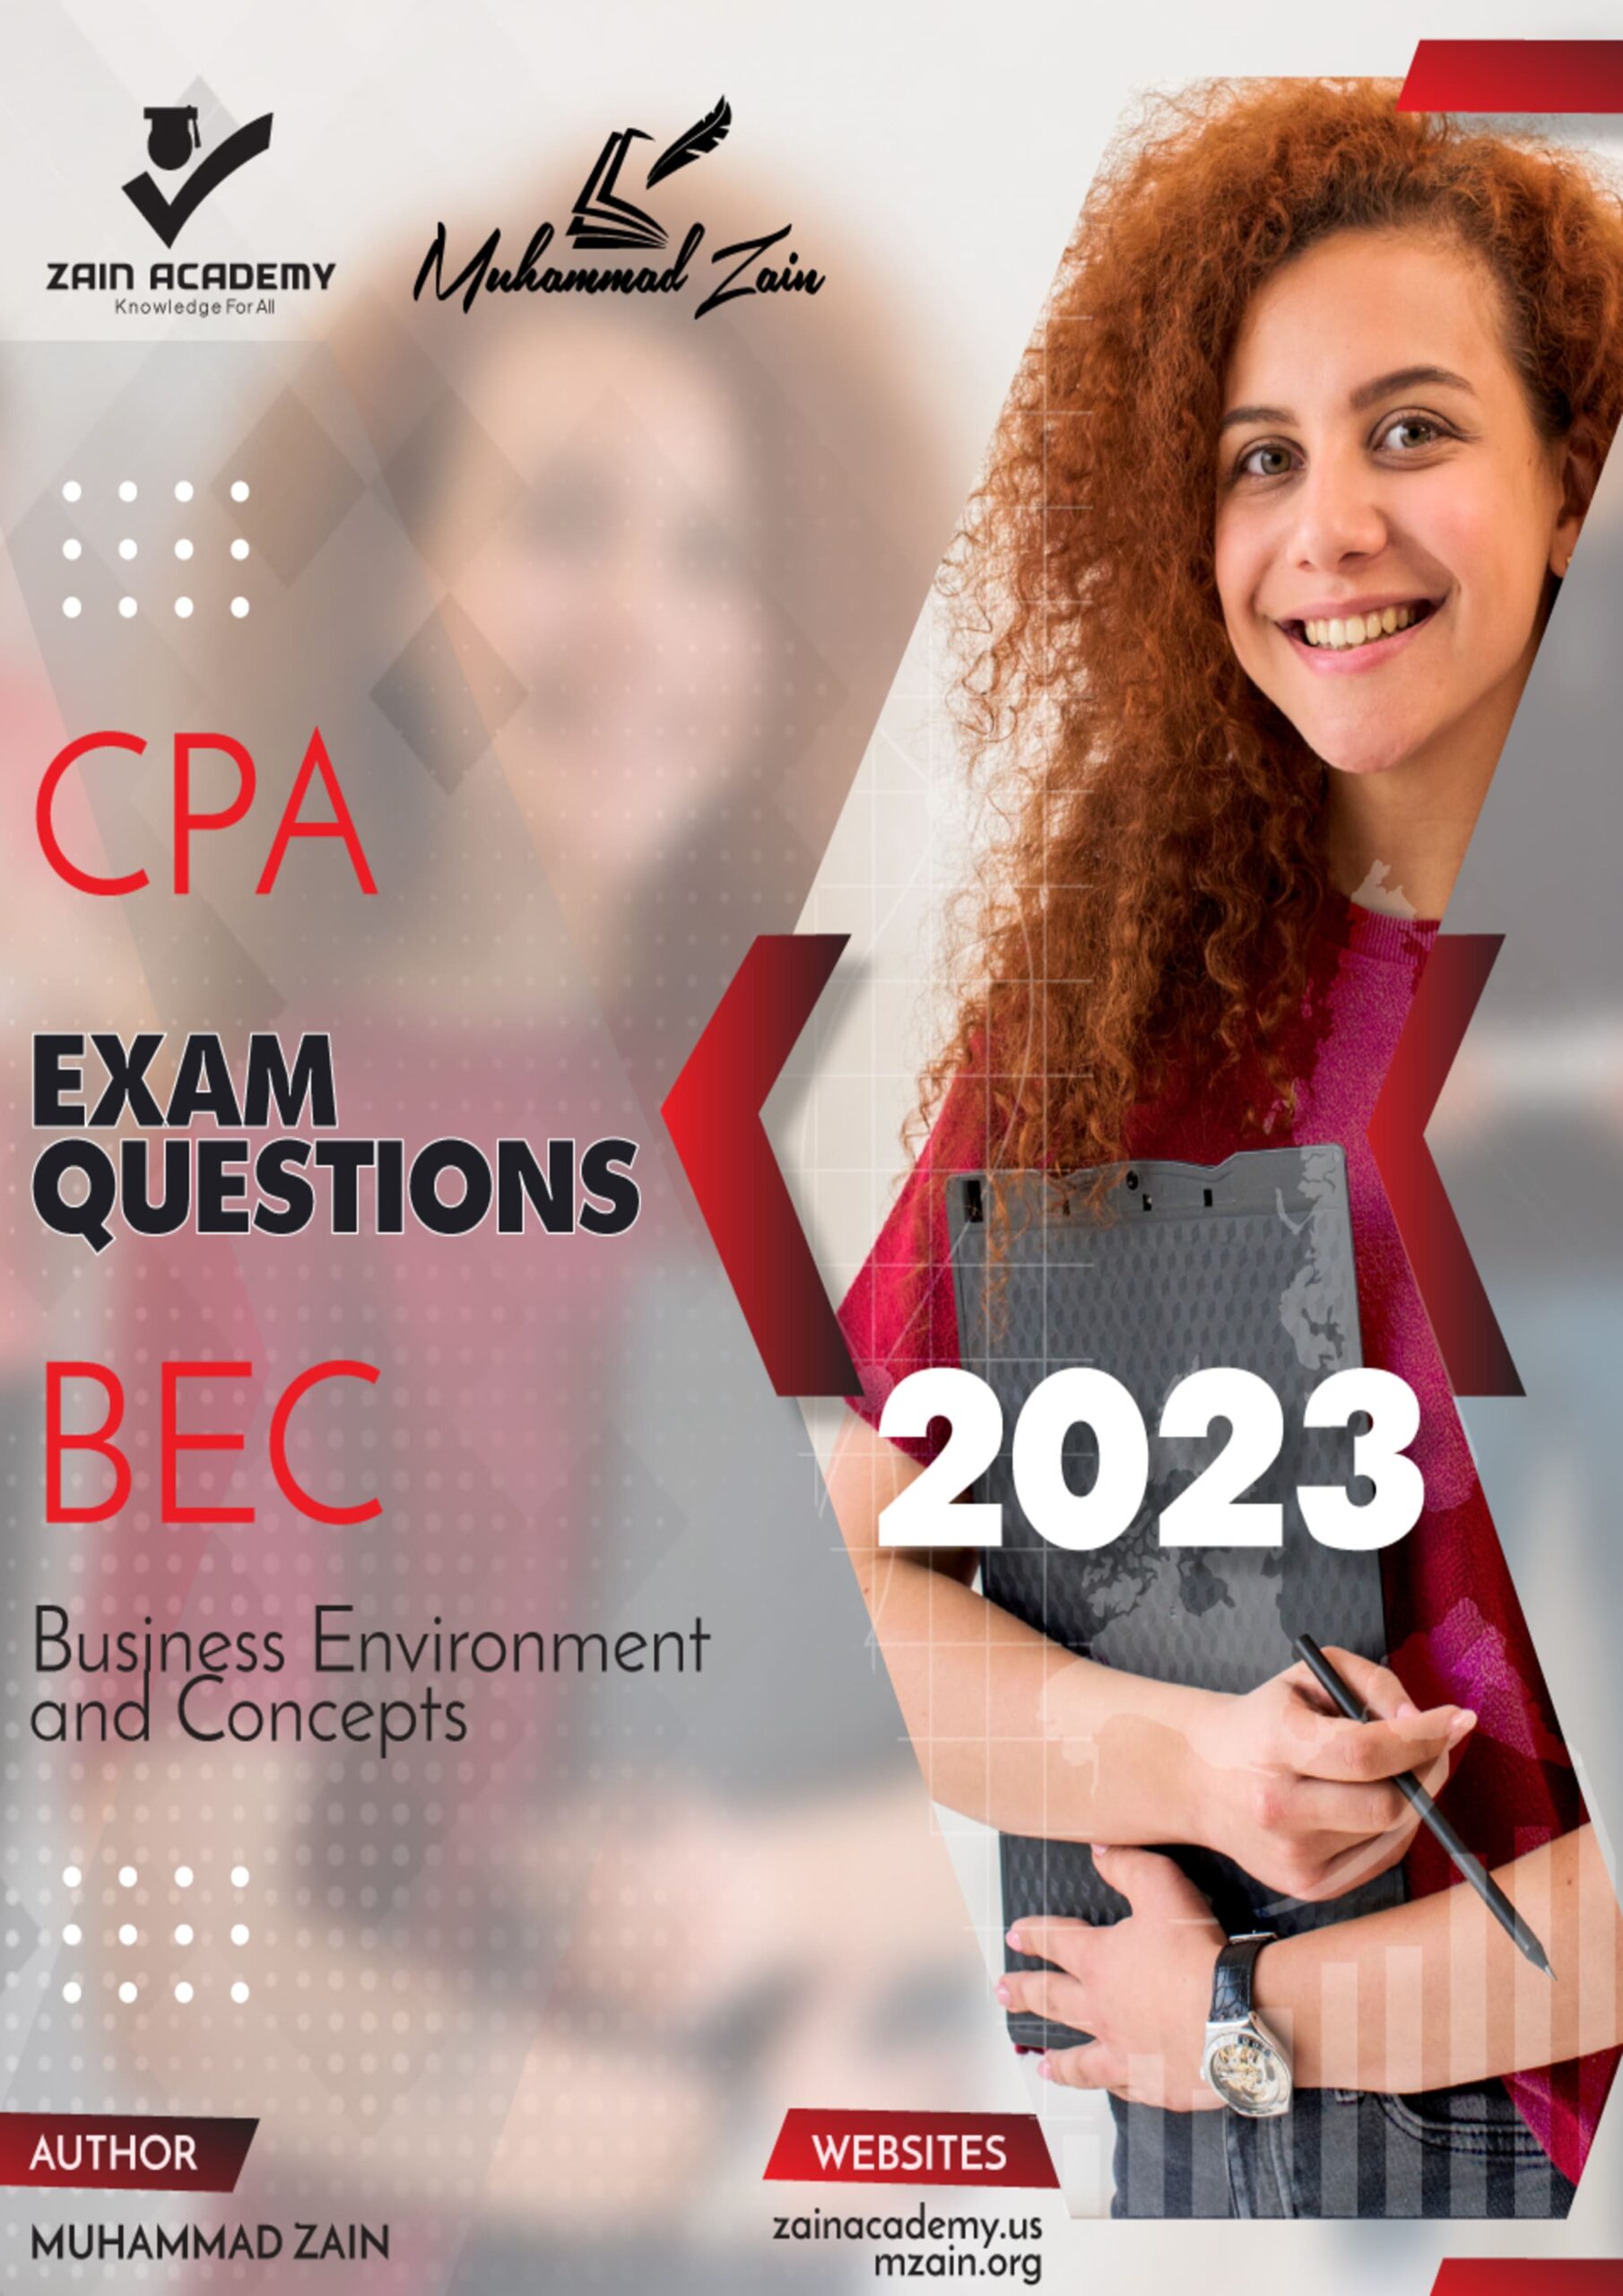 certified public accountant (cpa) exam questions business environment and concepts (bec) 2023